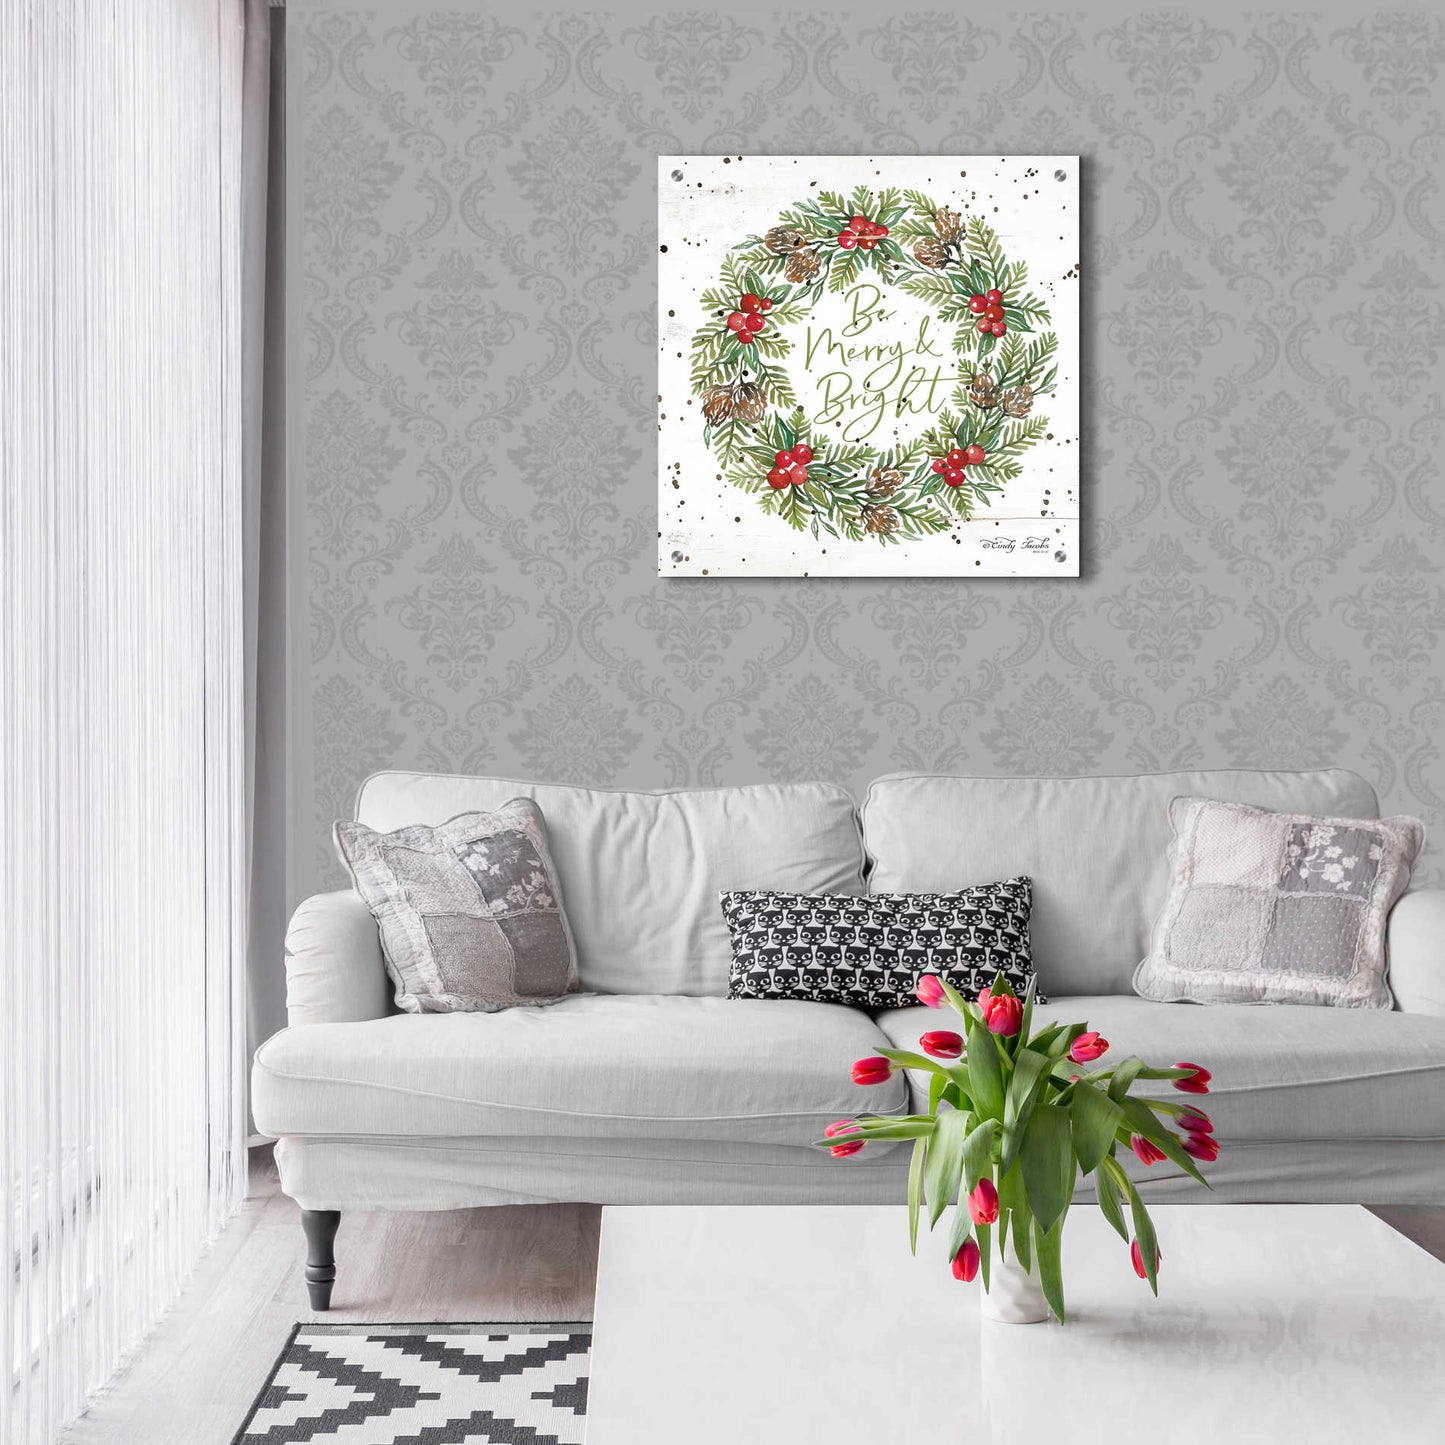 Epic Art 'Be Merry & Bright Wreath' by Cindy Jacobs, Acrylic Glass Wall Art,24x24